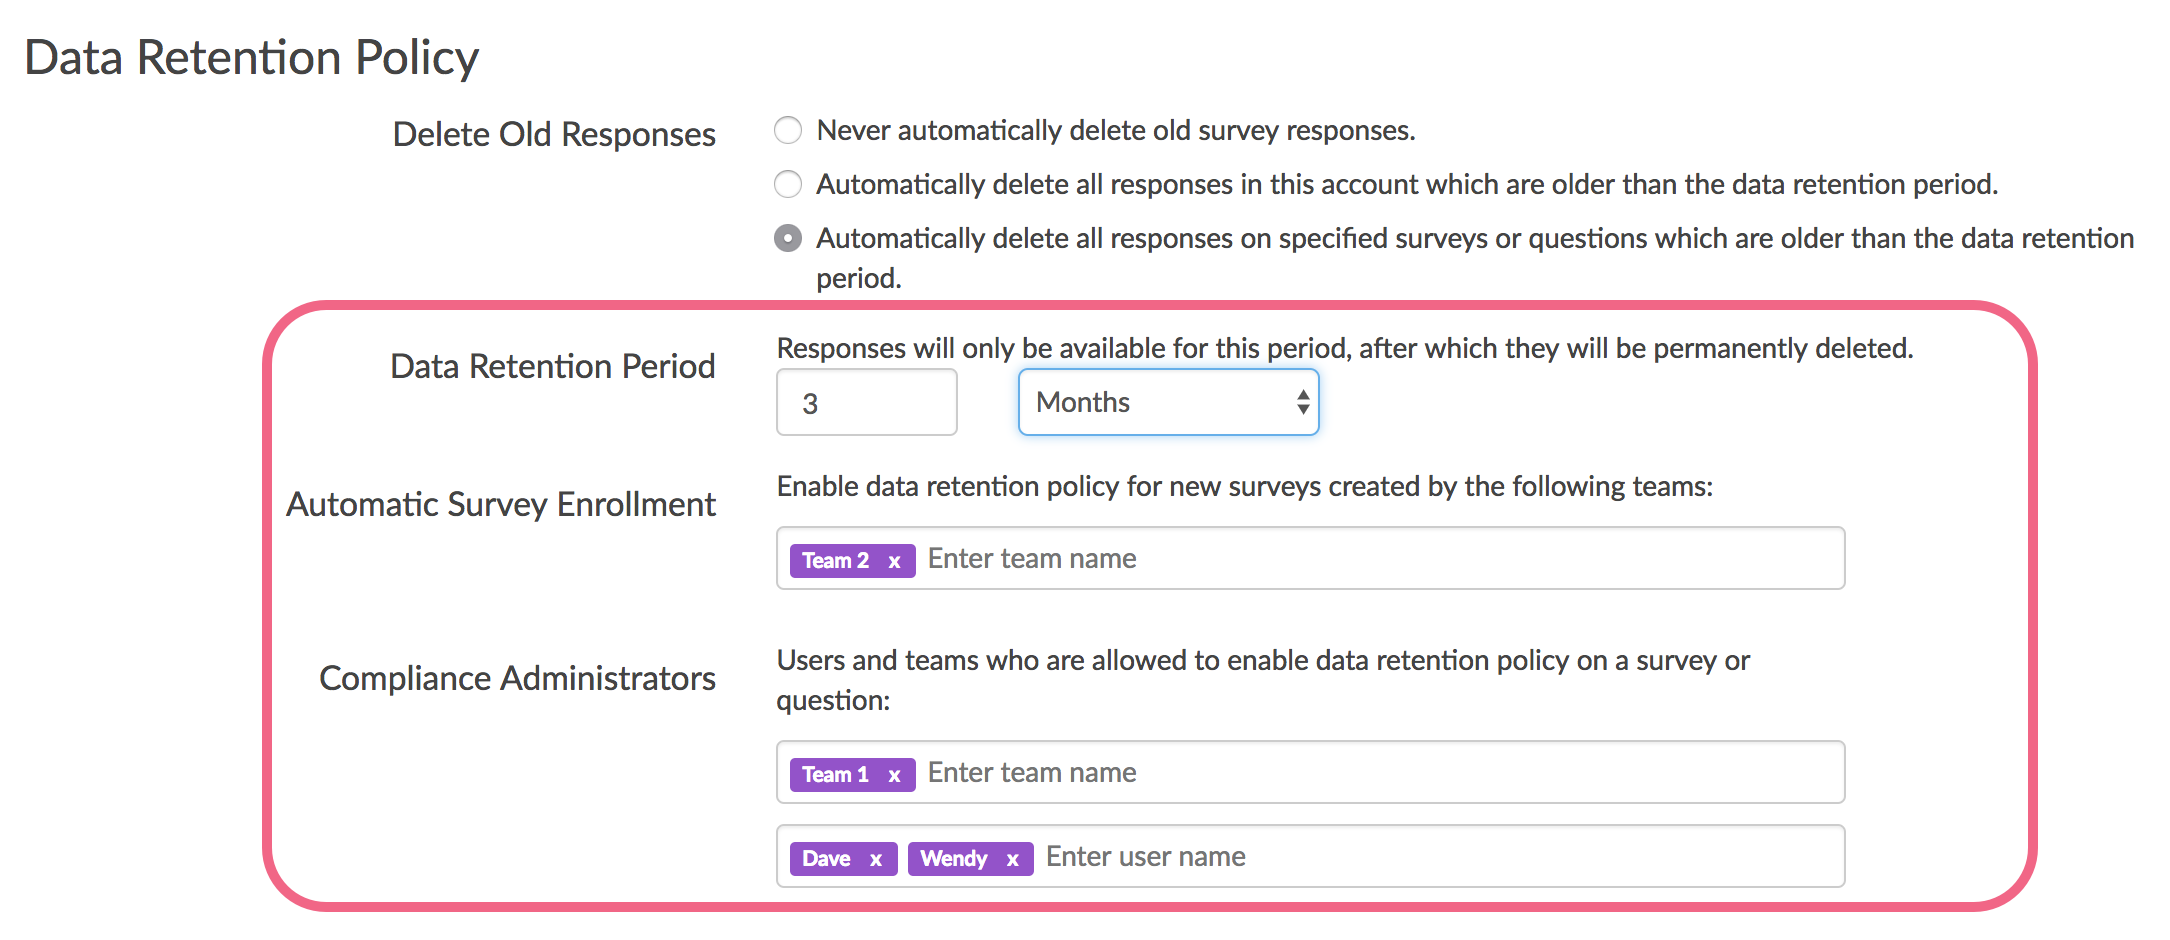 DRP Setting: Set up automatic enrollment and Compliance Administrators